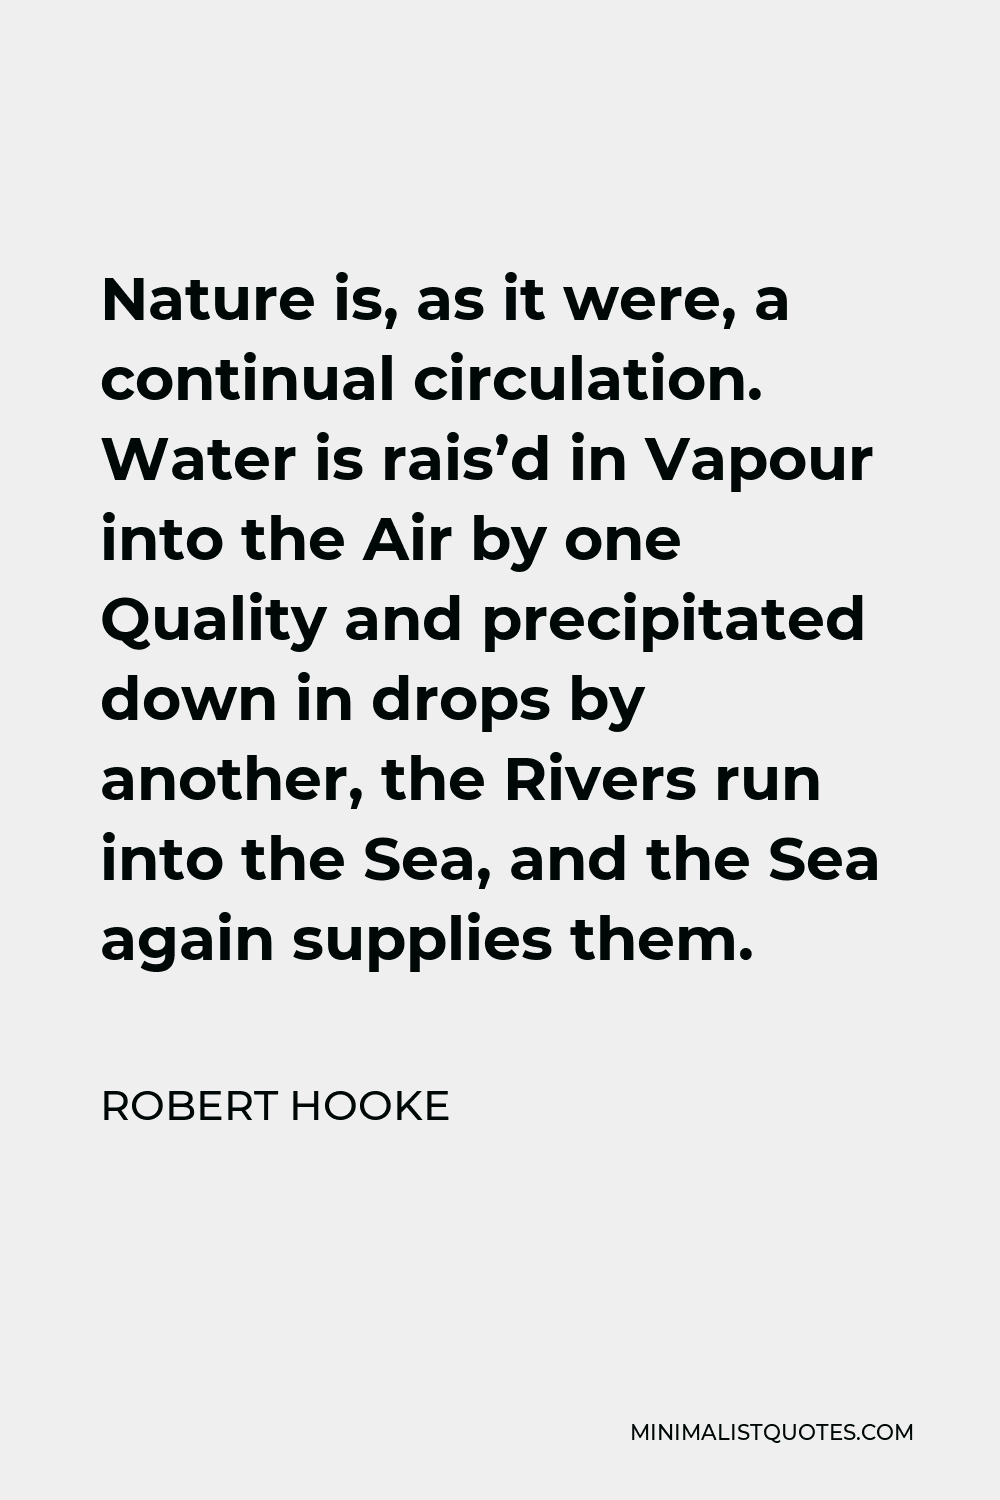 Robert Hooke Quote - Nature is, as it were, a continual circulation. Water is rais’d in Vapour into the Air by one Quality and precipitated down in drops by another, the Rivers run into the Sea, and the Sea again supplies them.